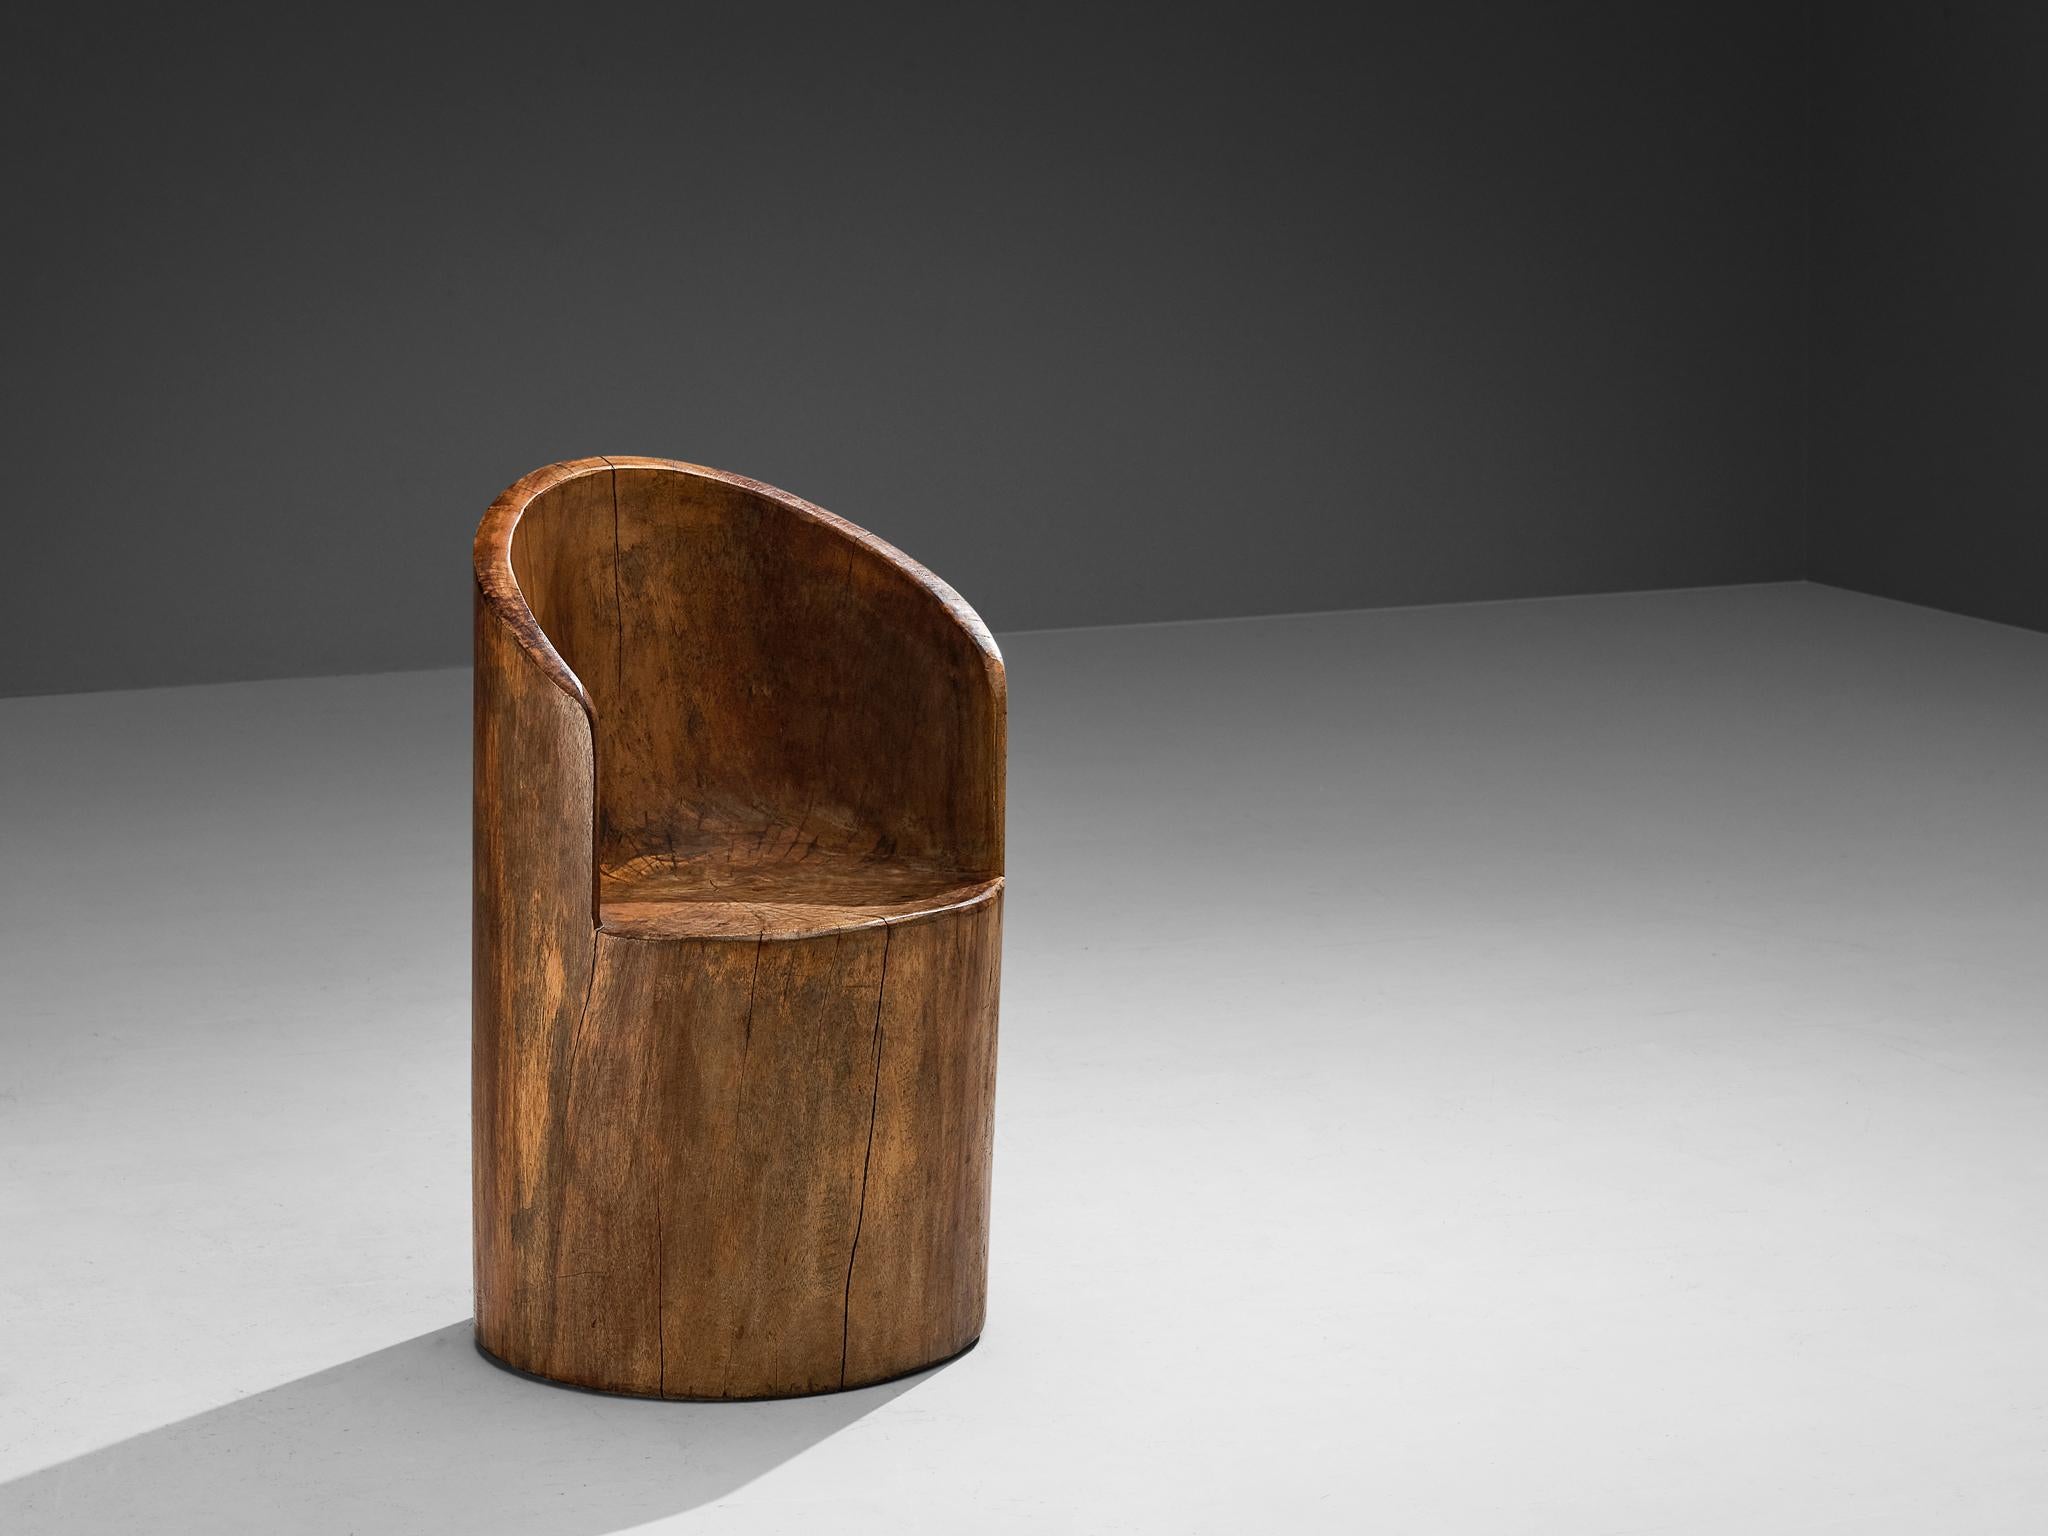 José Zanine Caldas, hand-sculpted chair, Brazilian hardwood (Vinhático), Brazil, 1980s

This exceptional hand carved chair embodies everything that José Zanine Caldas stood for: love of nature and especially wood. Created in the 1980s, this chair is